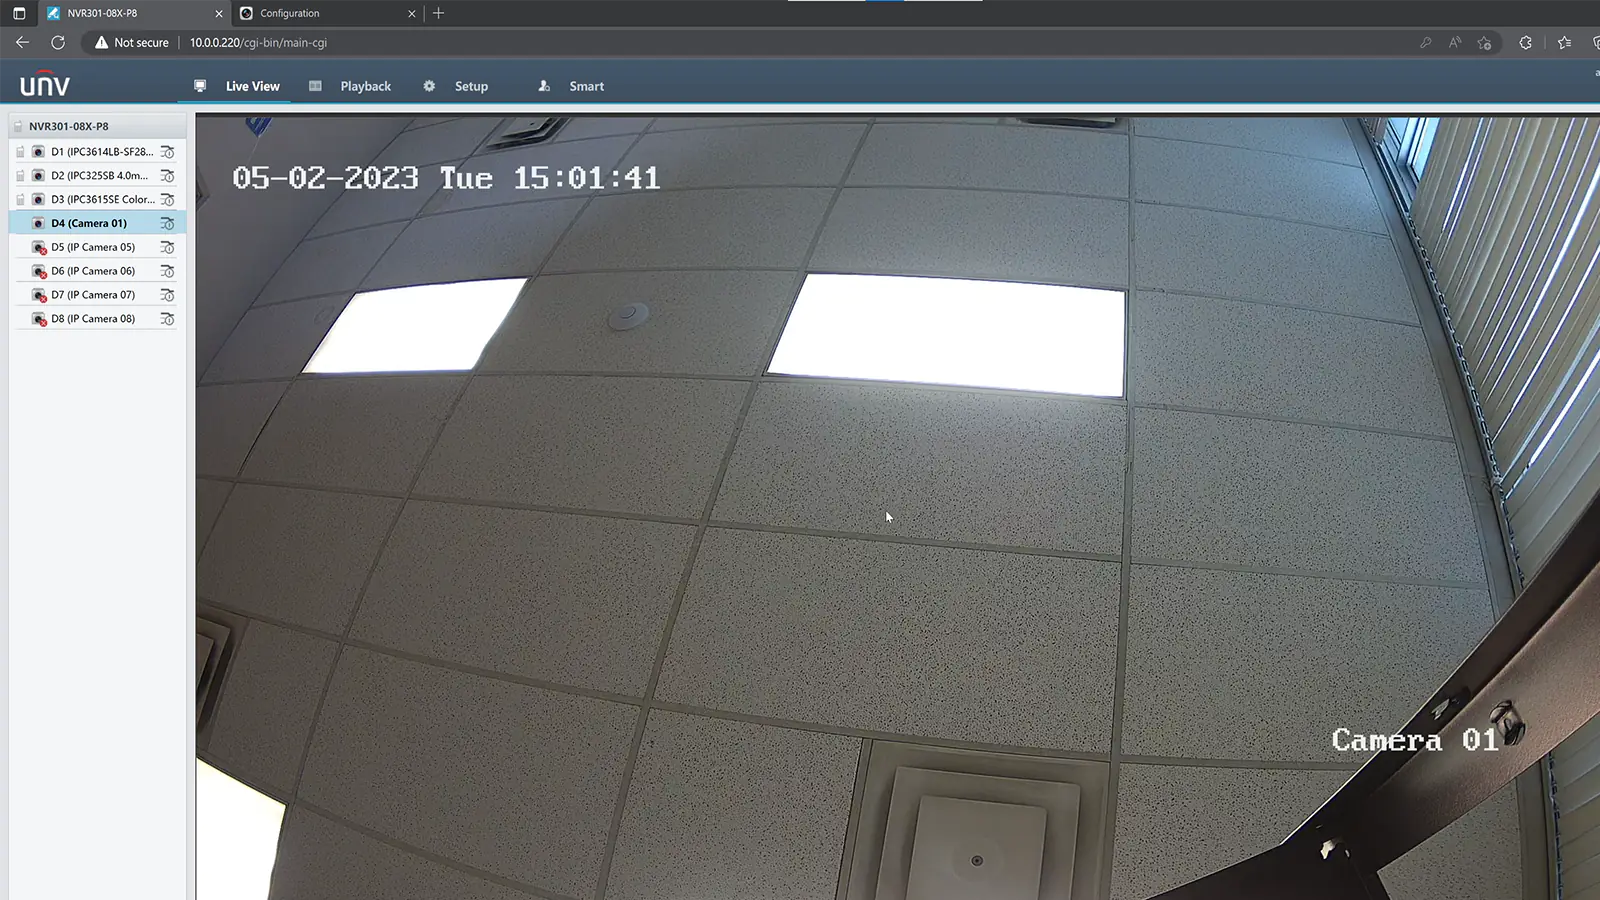 Hikvision camera showing on Uniview NVR's live view